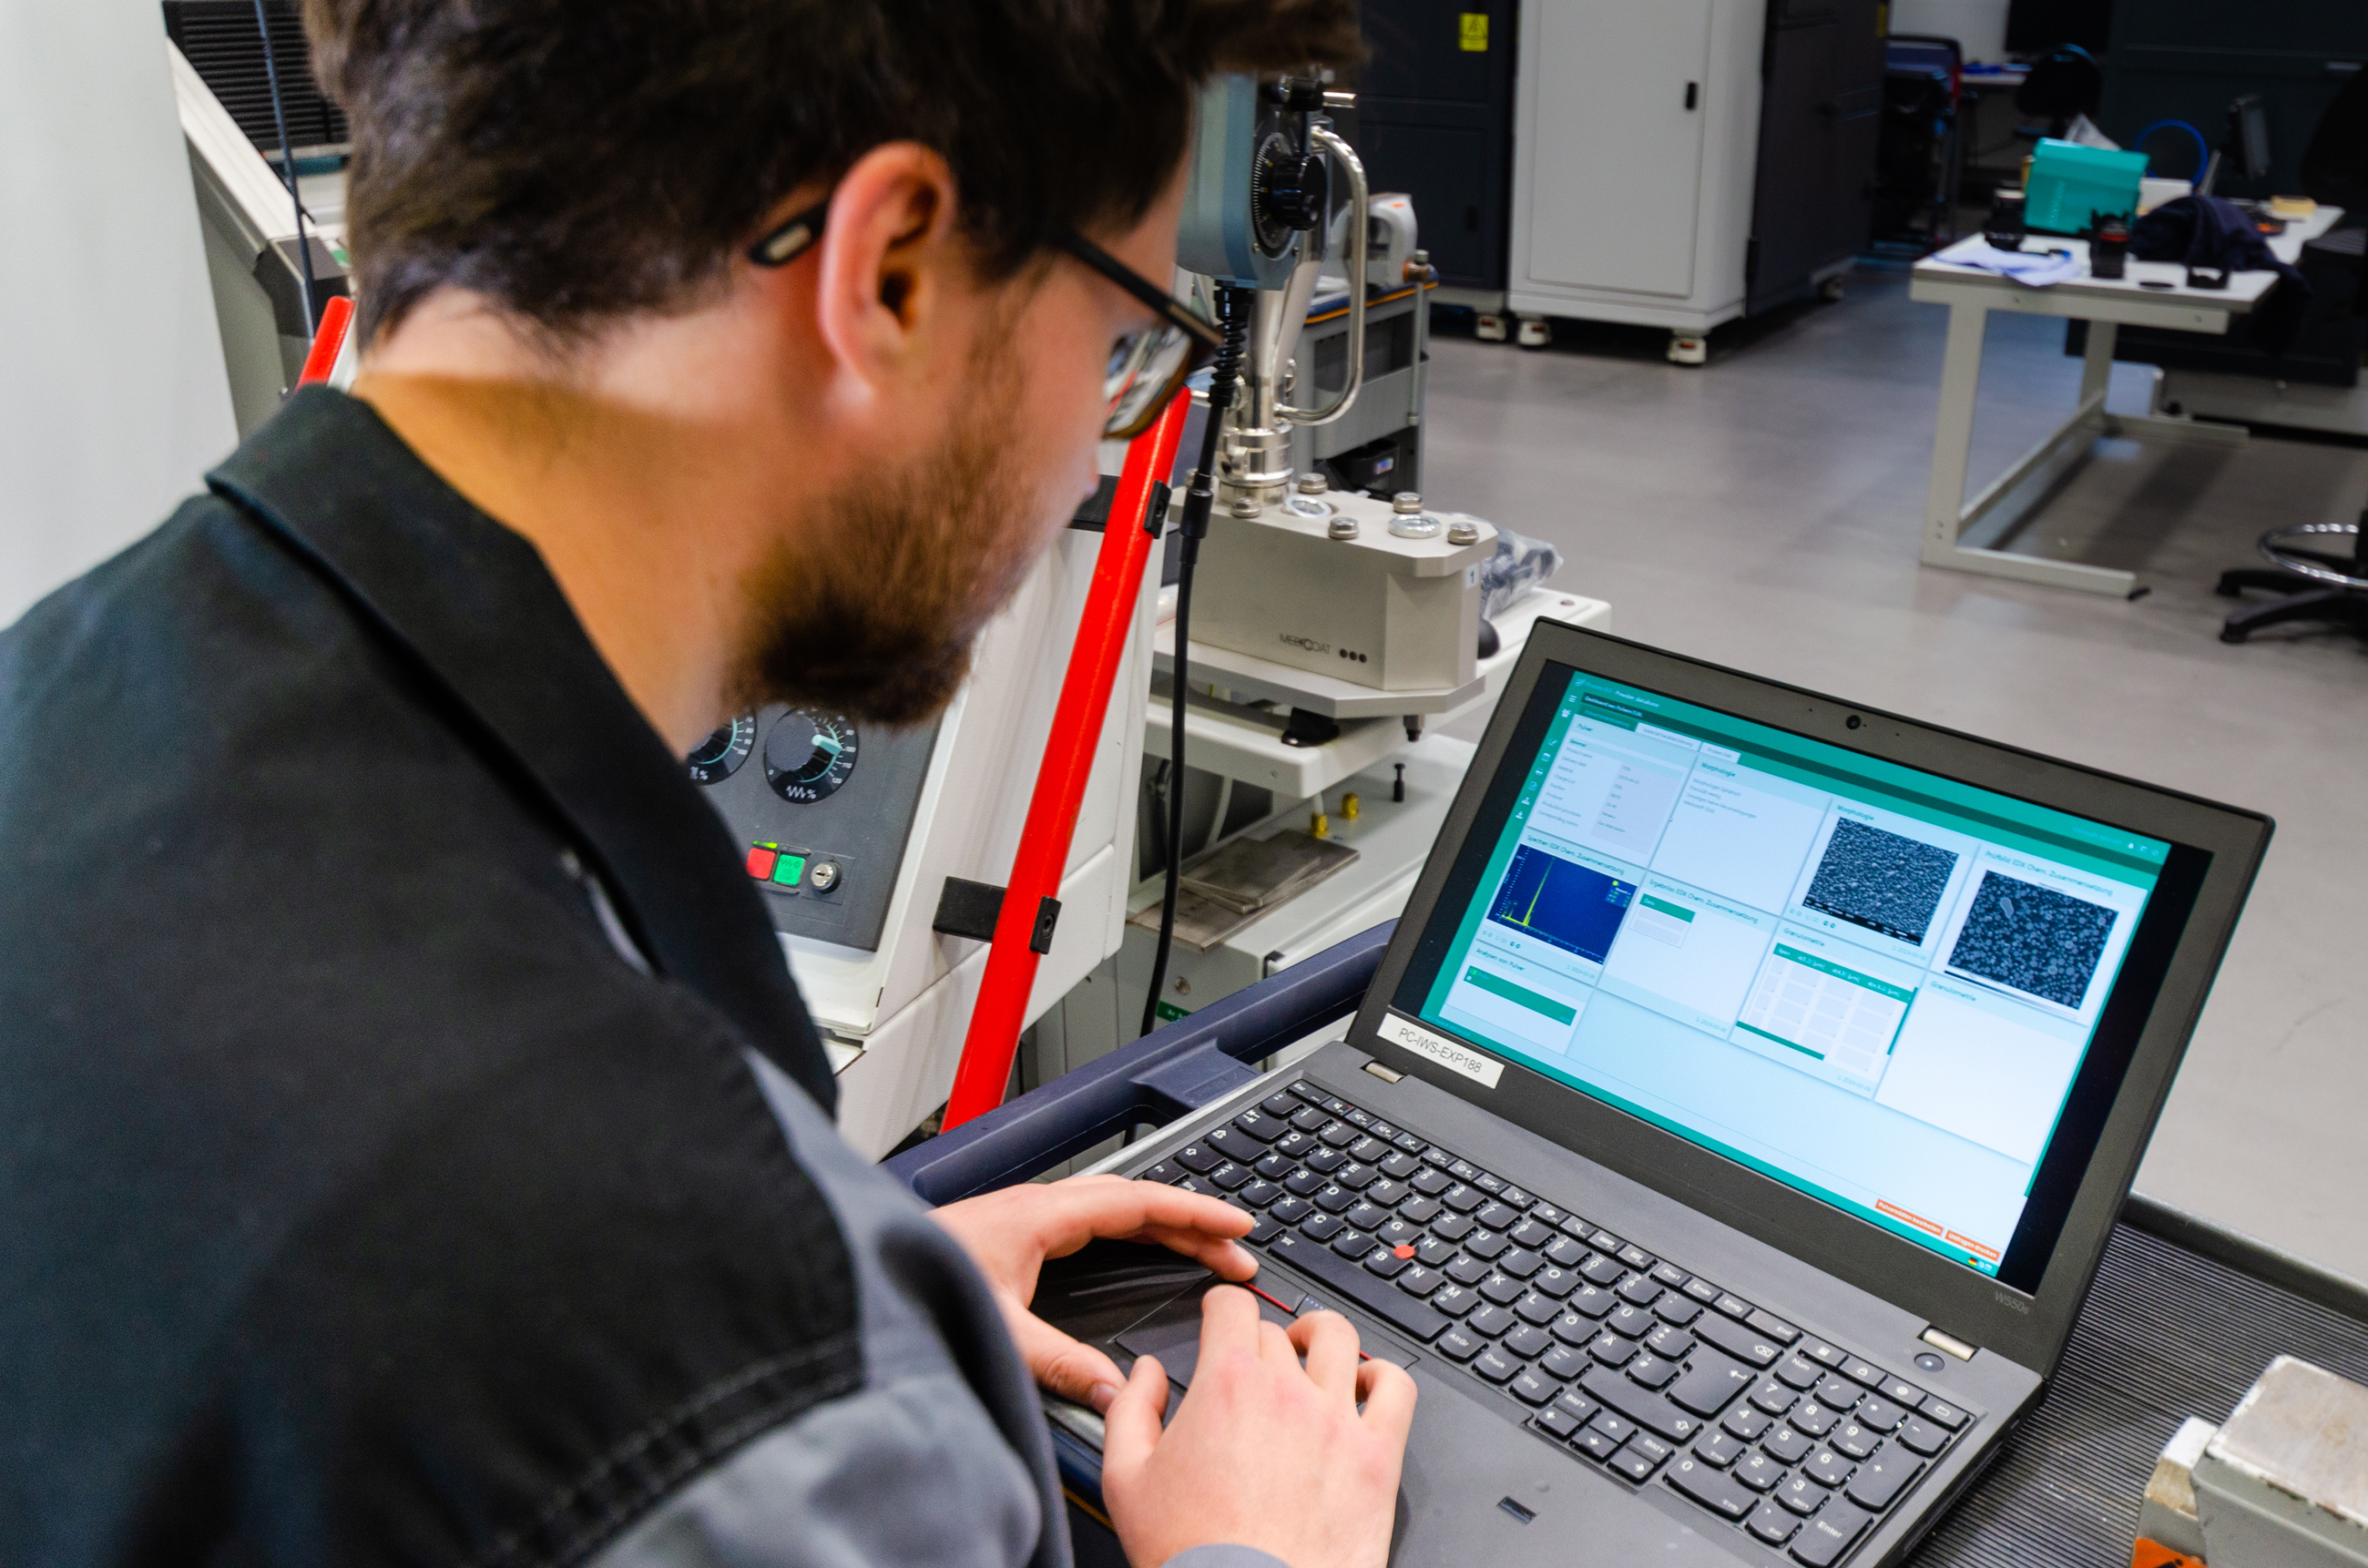 Fraunhofer IWS Dresden has developed a process and material database which stores all details of the manufactured components. This database allows complex conclusions between the welding result and already obtained data.